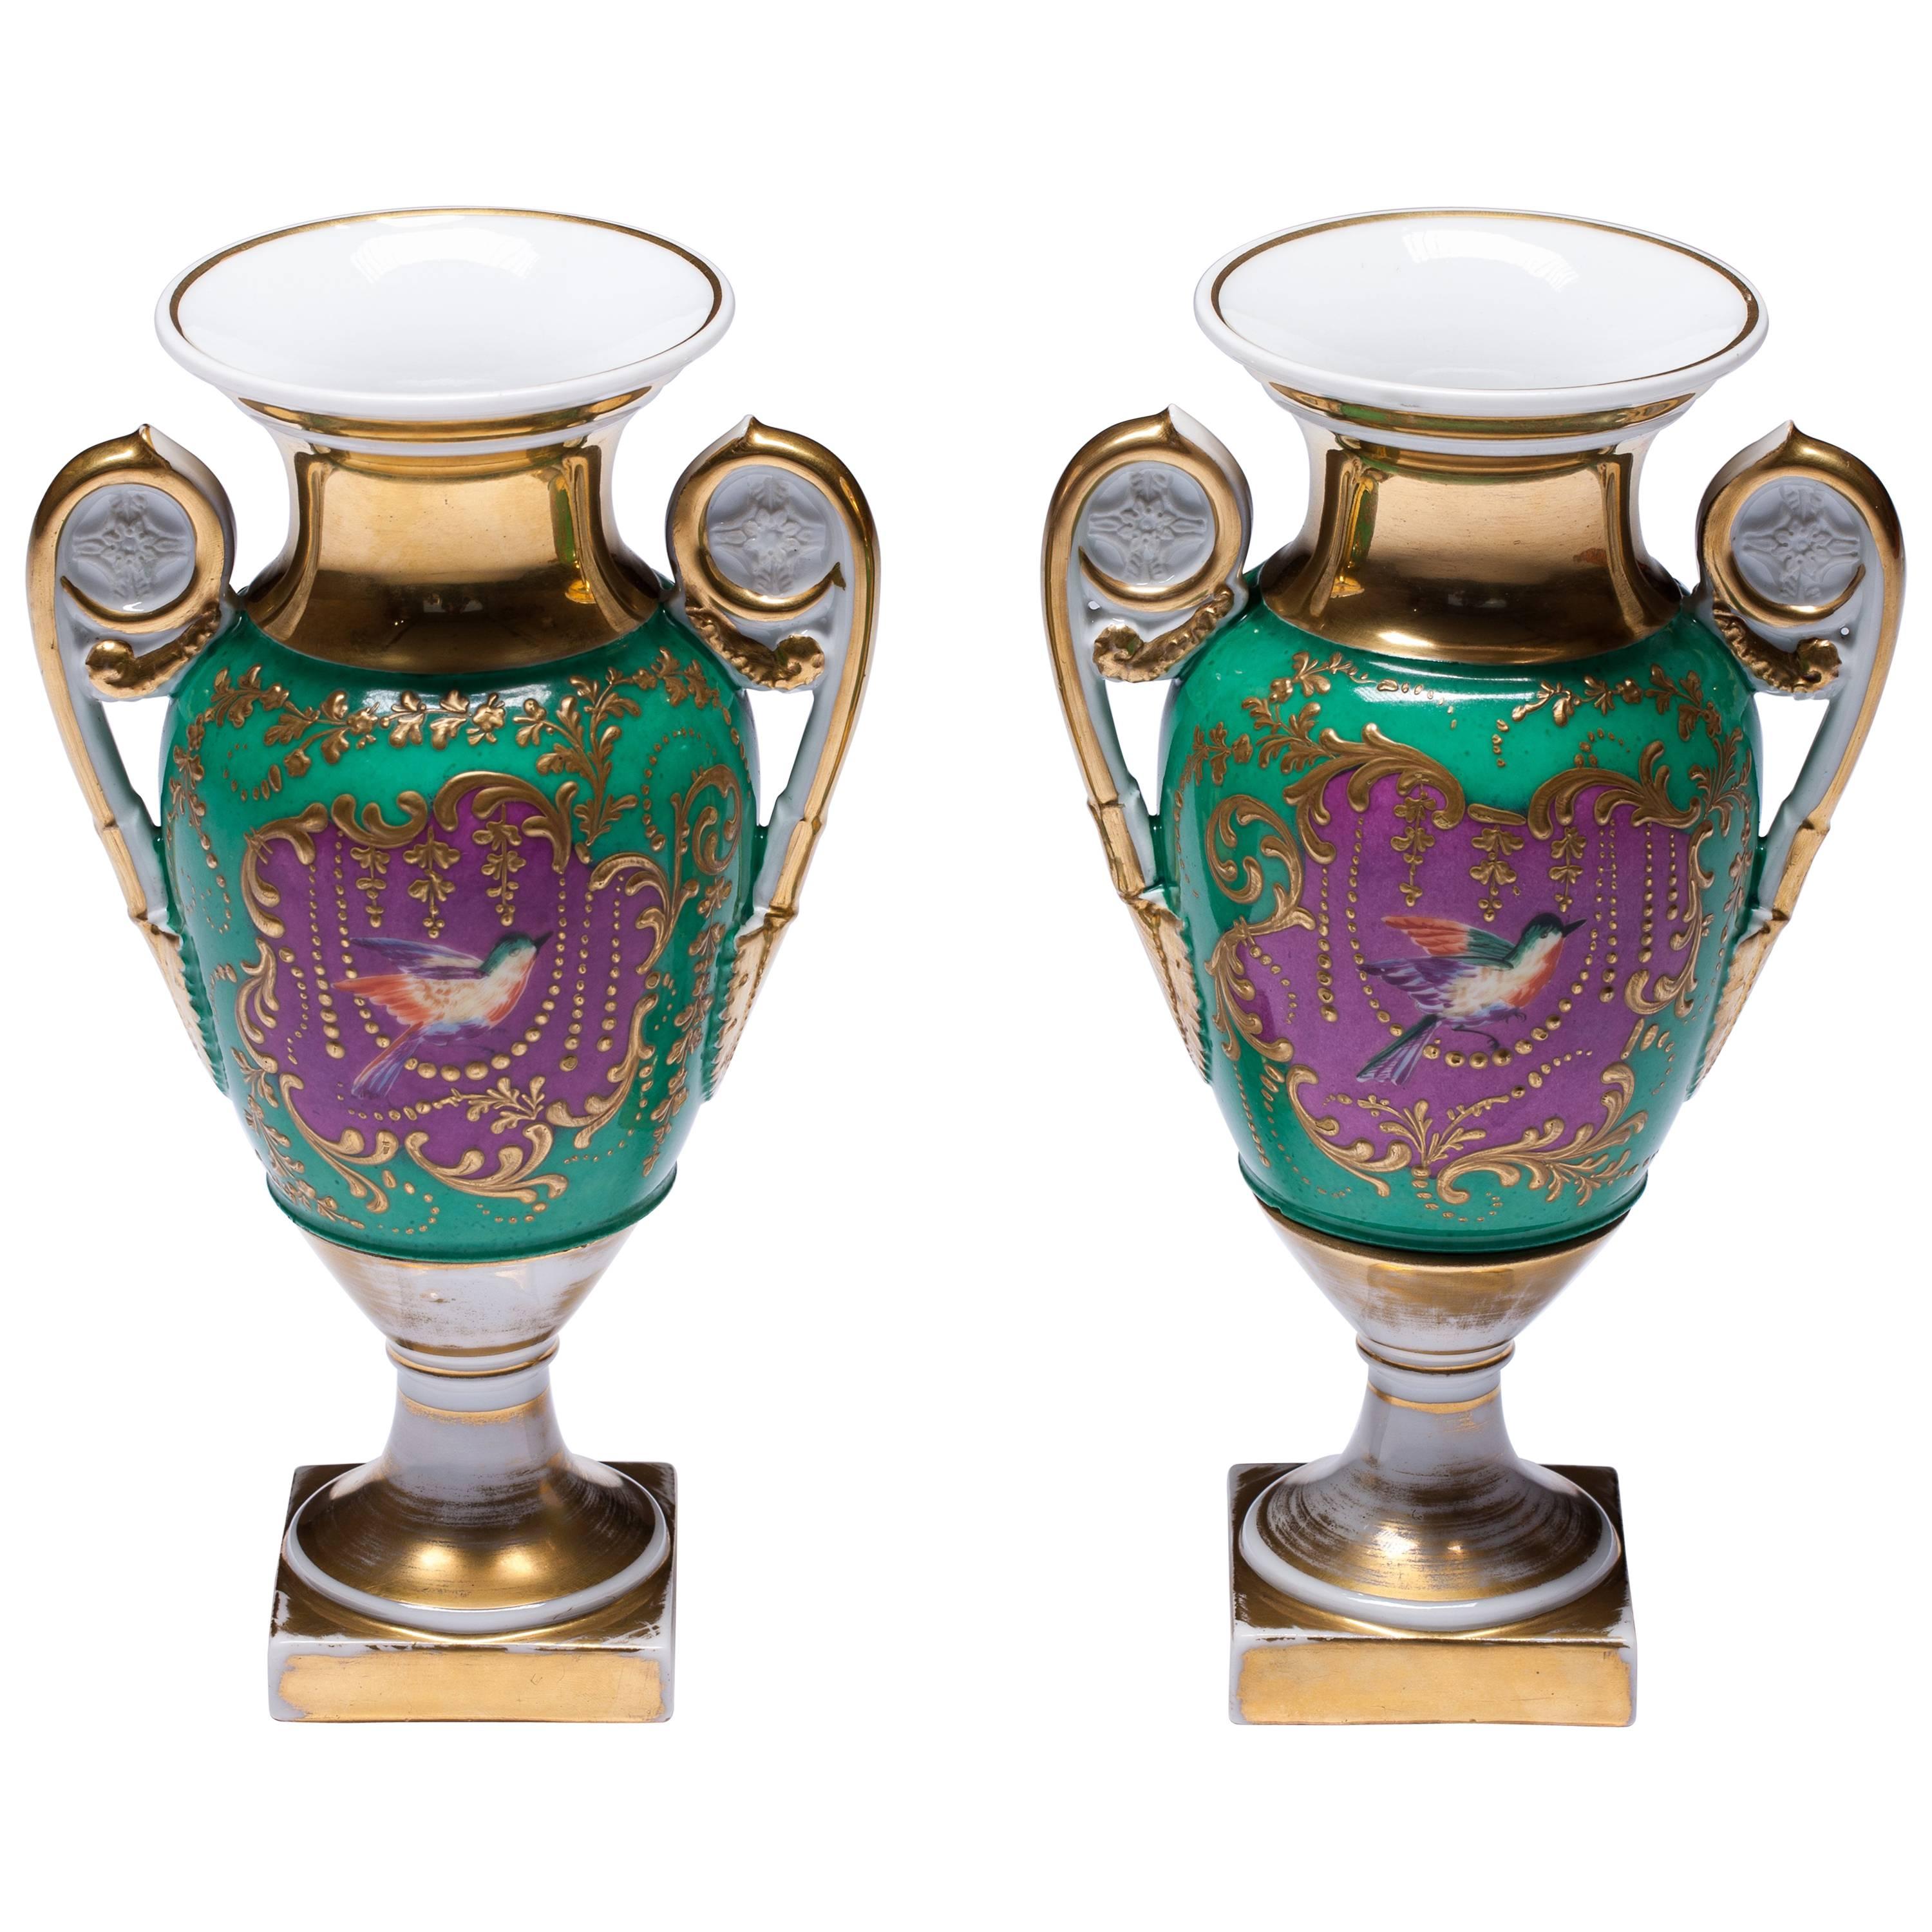 Old Paris Porcelain Hand-Painted Neoclassical Vases